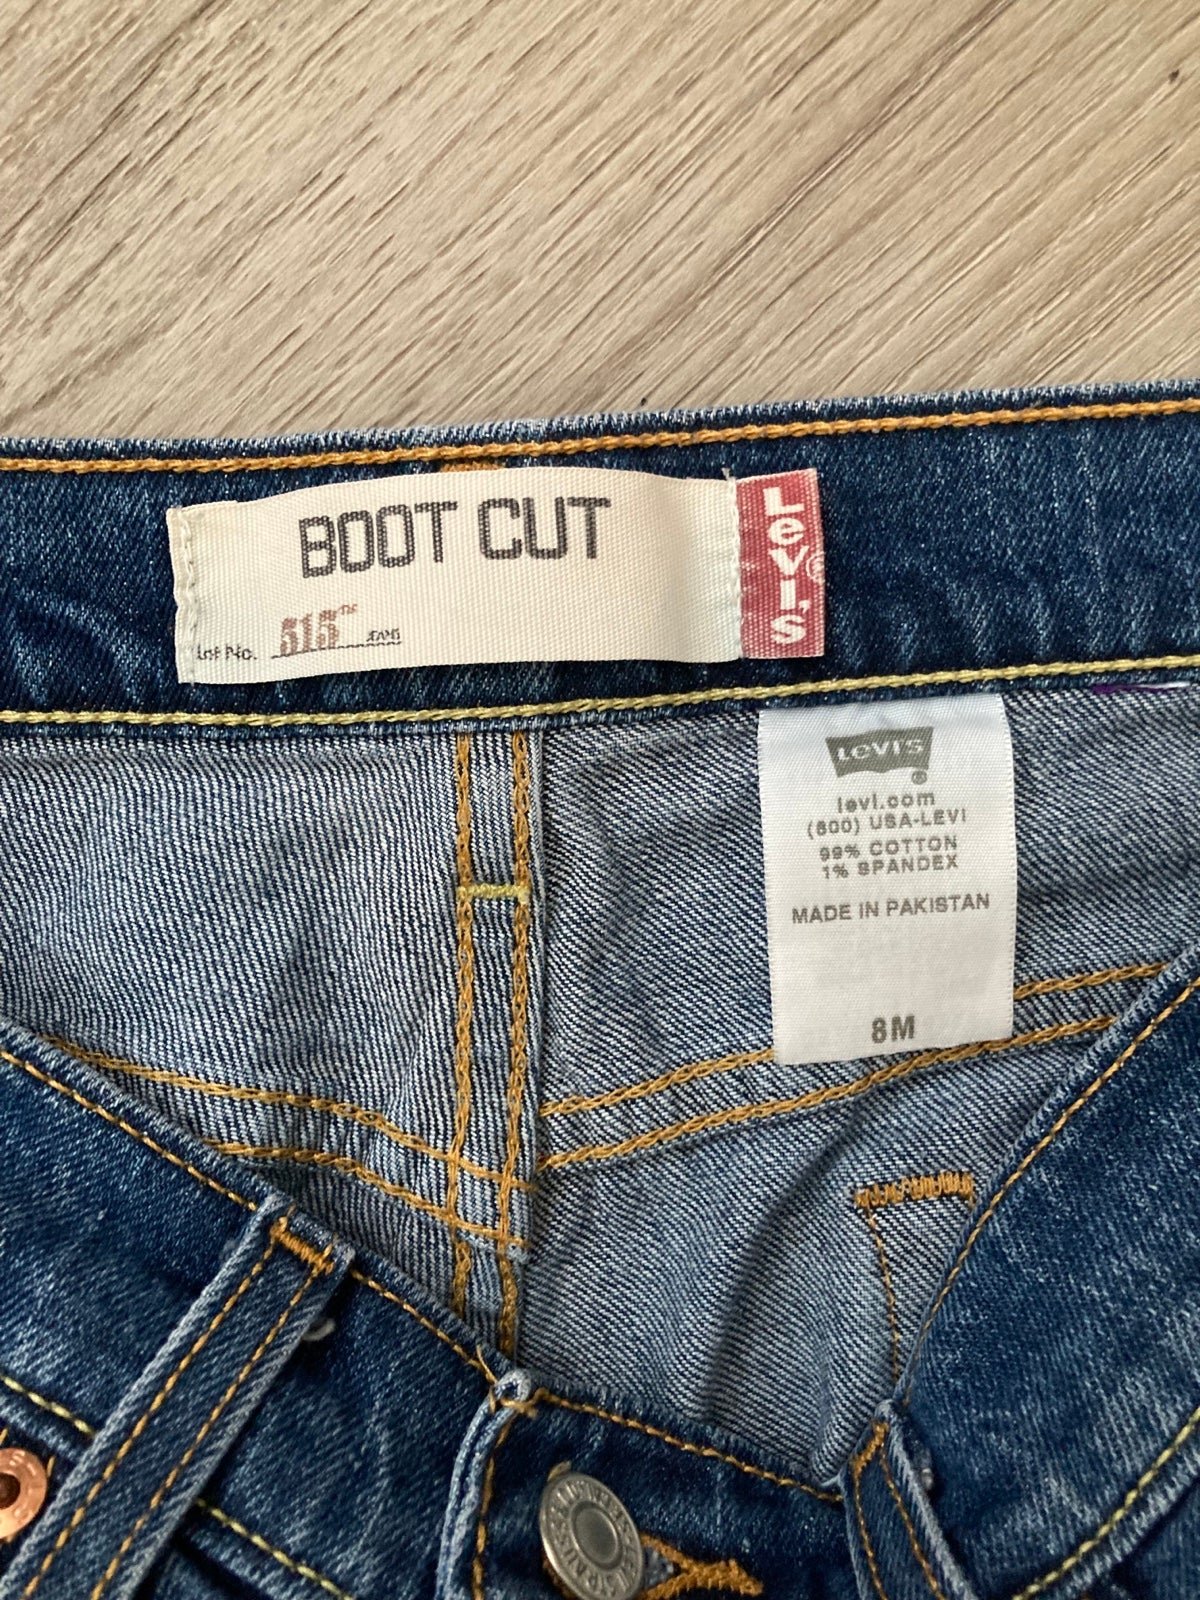 Special offer  Levi´s bootcut jeans KgaKrZDgq well sale